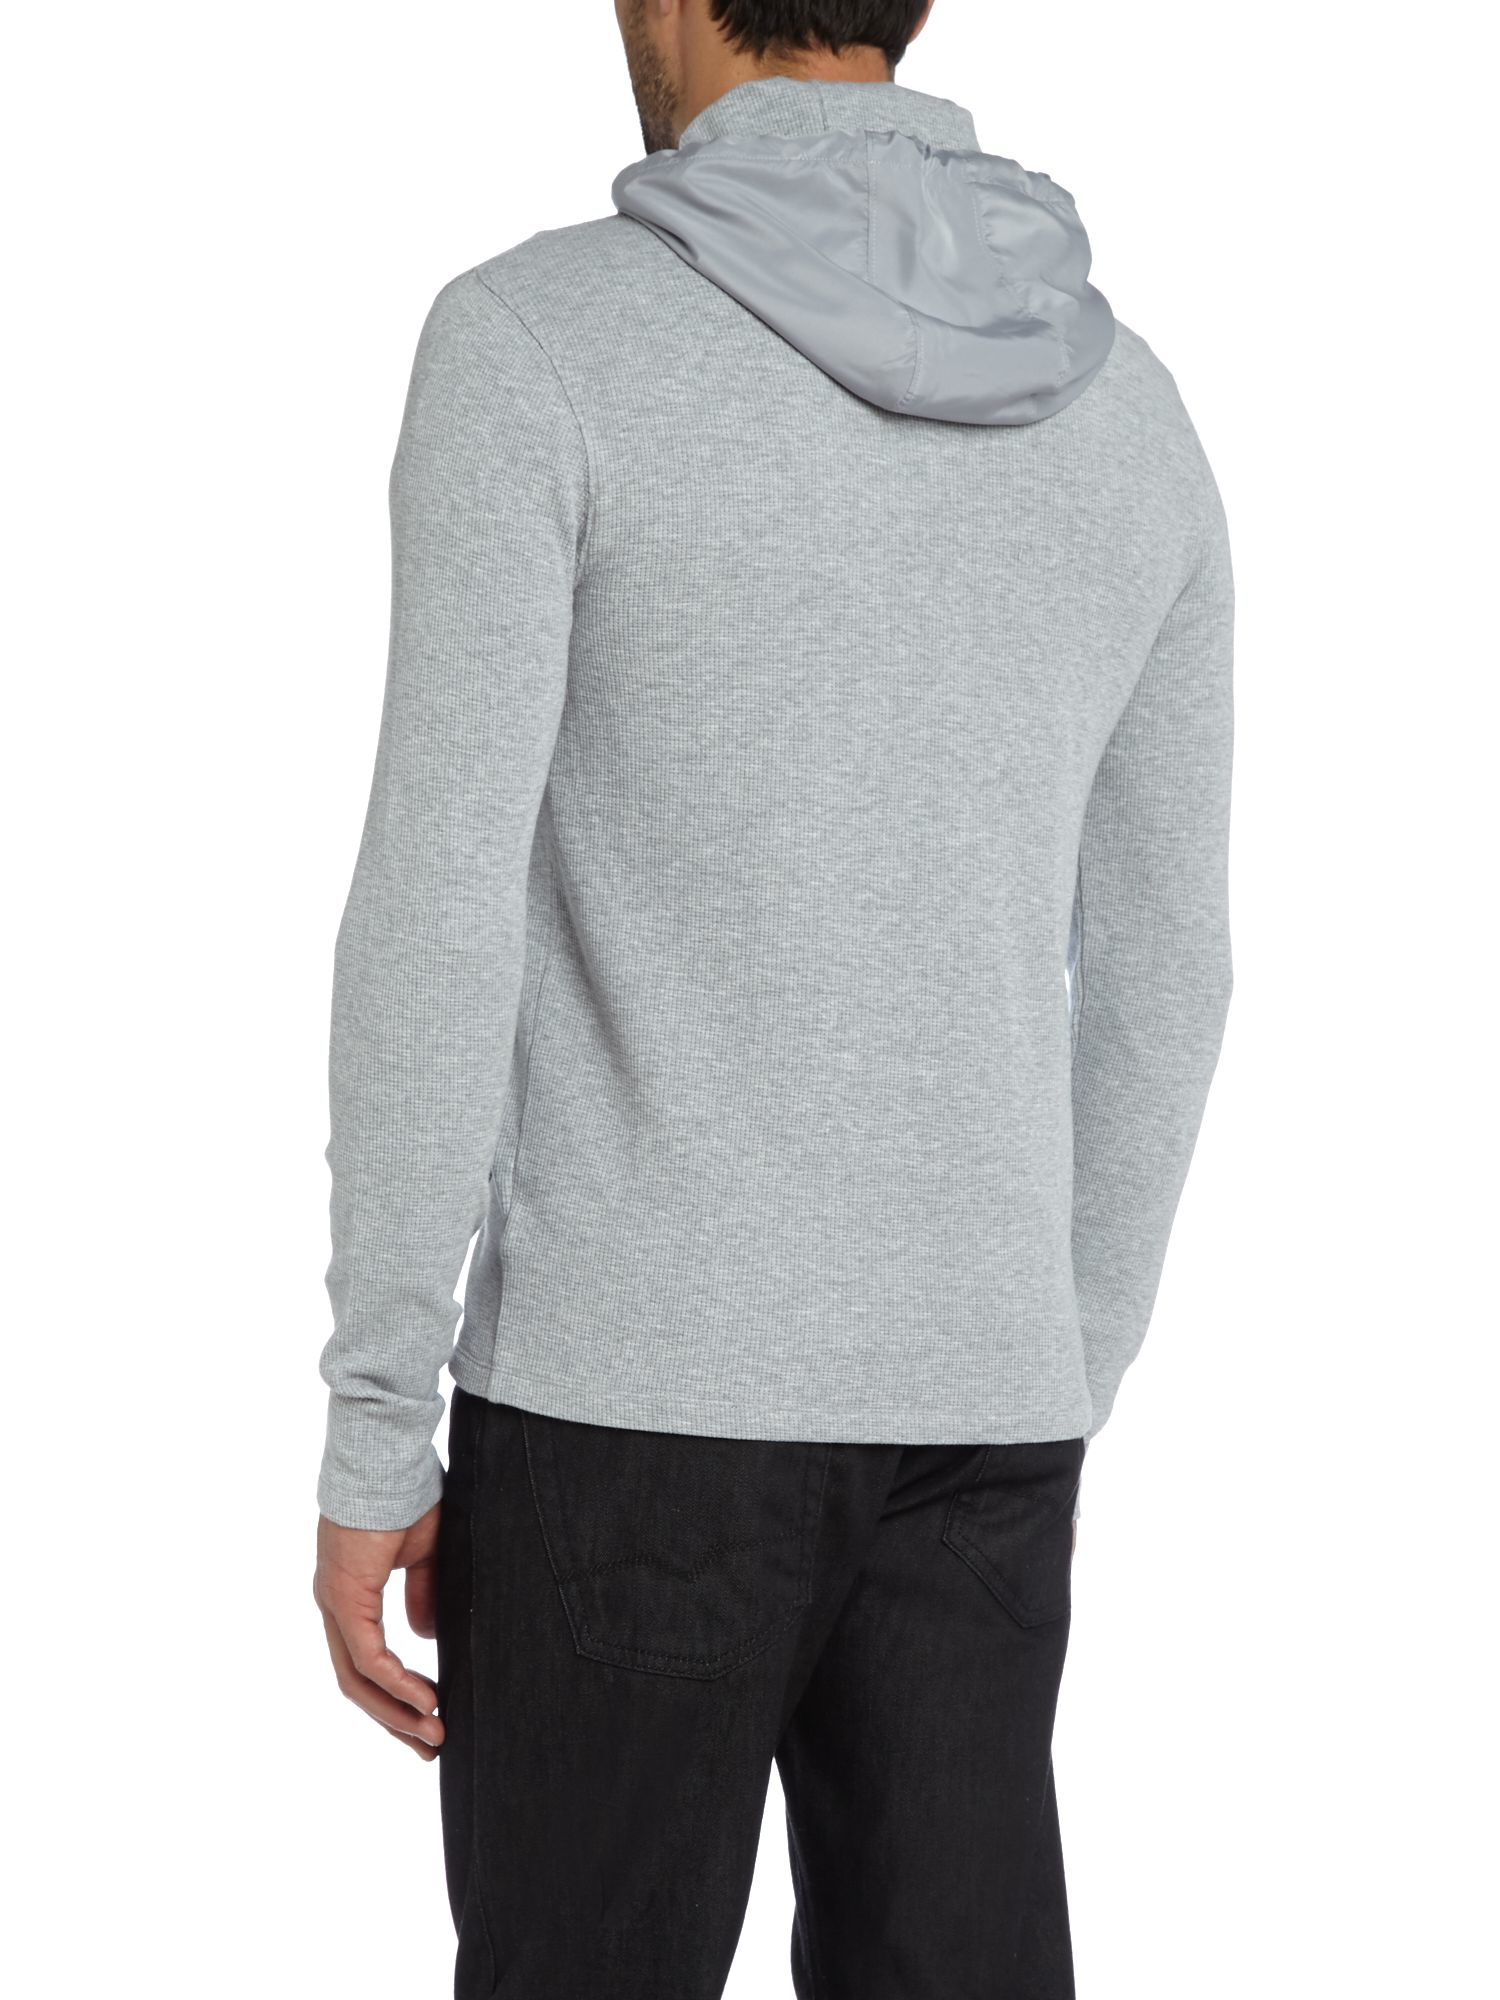 Michael kors Zip Up Waffle Hooded Jacket in Gray for Men (Heather) | Lyst